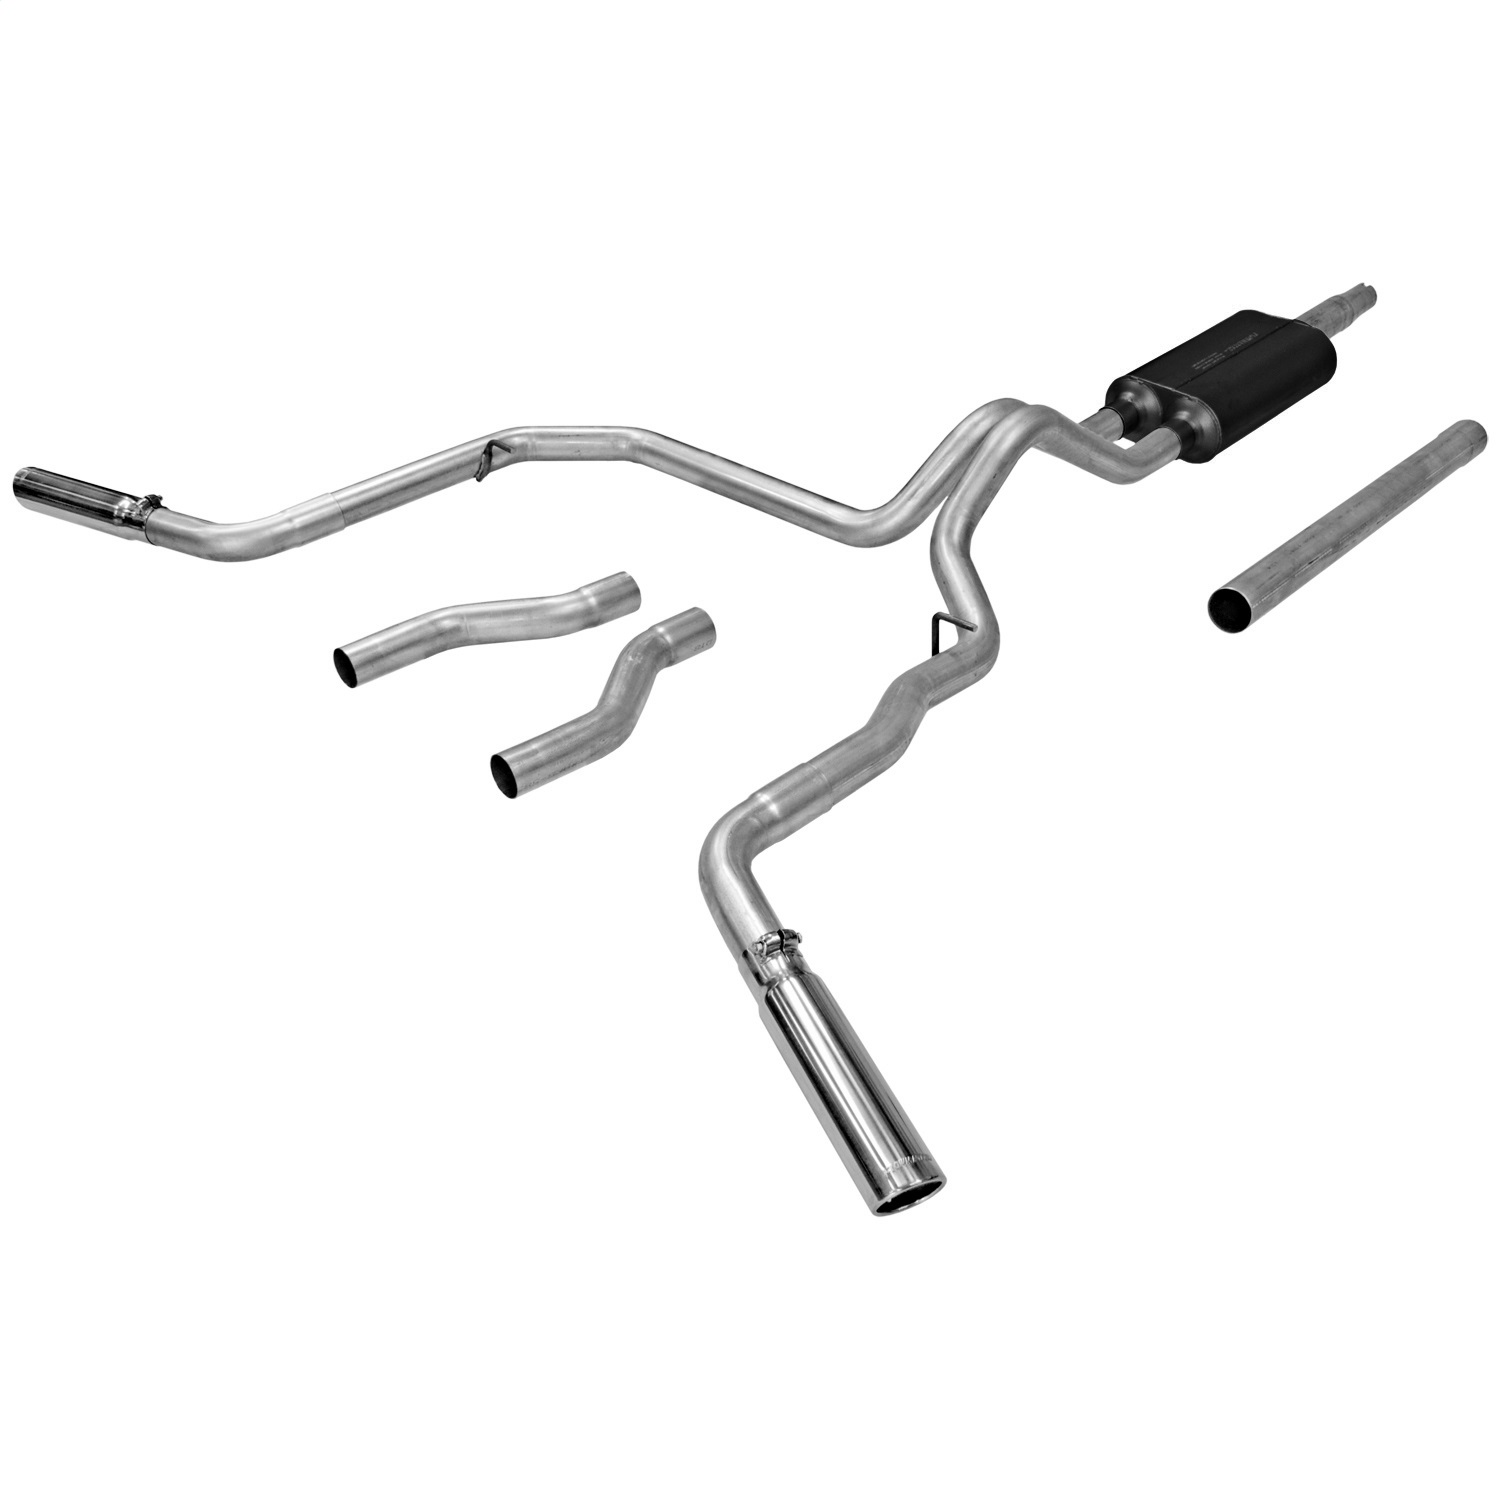 Flowmaster Flowmaster 817471 American Thunder Cat Back Exhaust System Fits 87-96 F-150